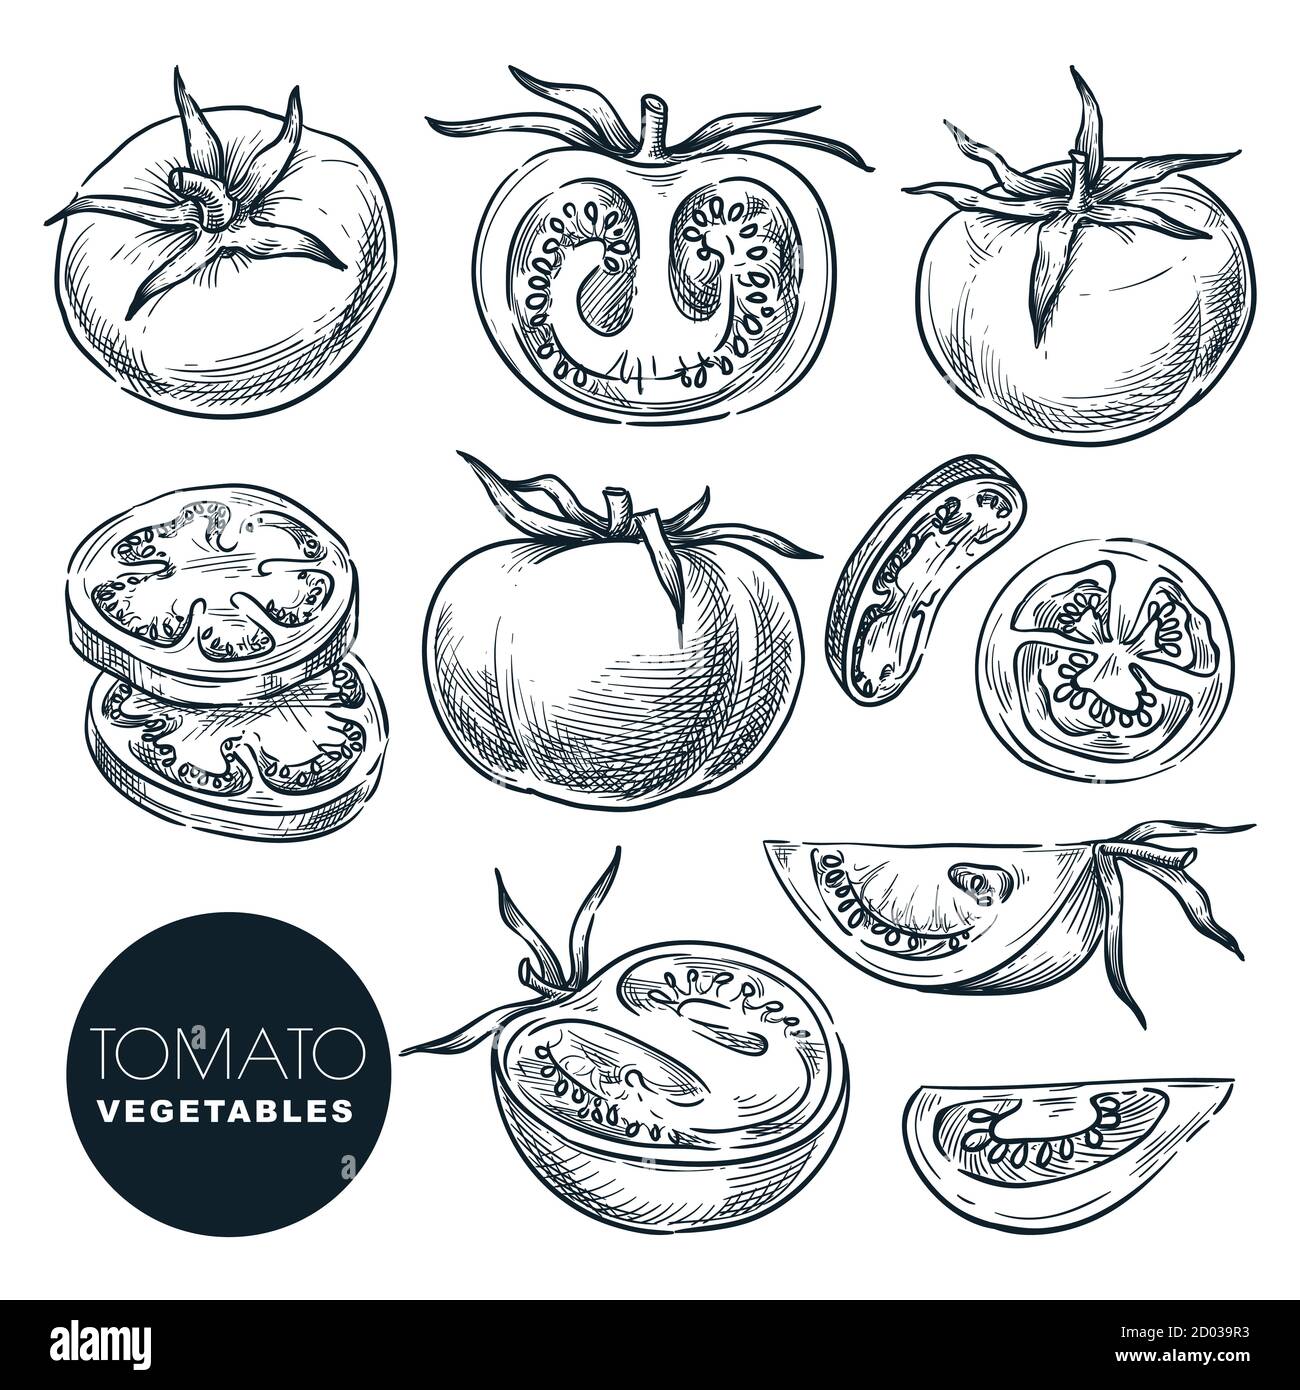 Tomato Drawing Easy | Tomato Drawing Step by Step Nifty Toy Art | Drawing  tutorial : Tomato Drawing Easy | Tomato Drawing Step by Step Nifty Toy Art  Hi friends, this is